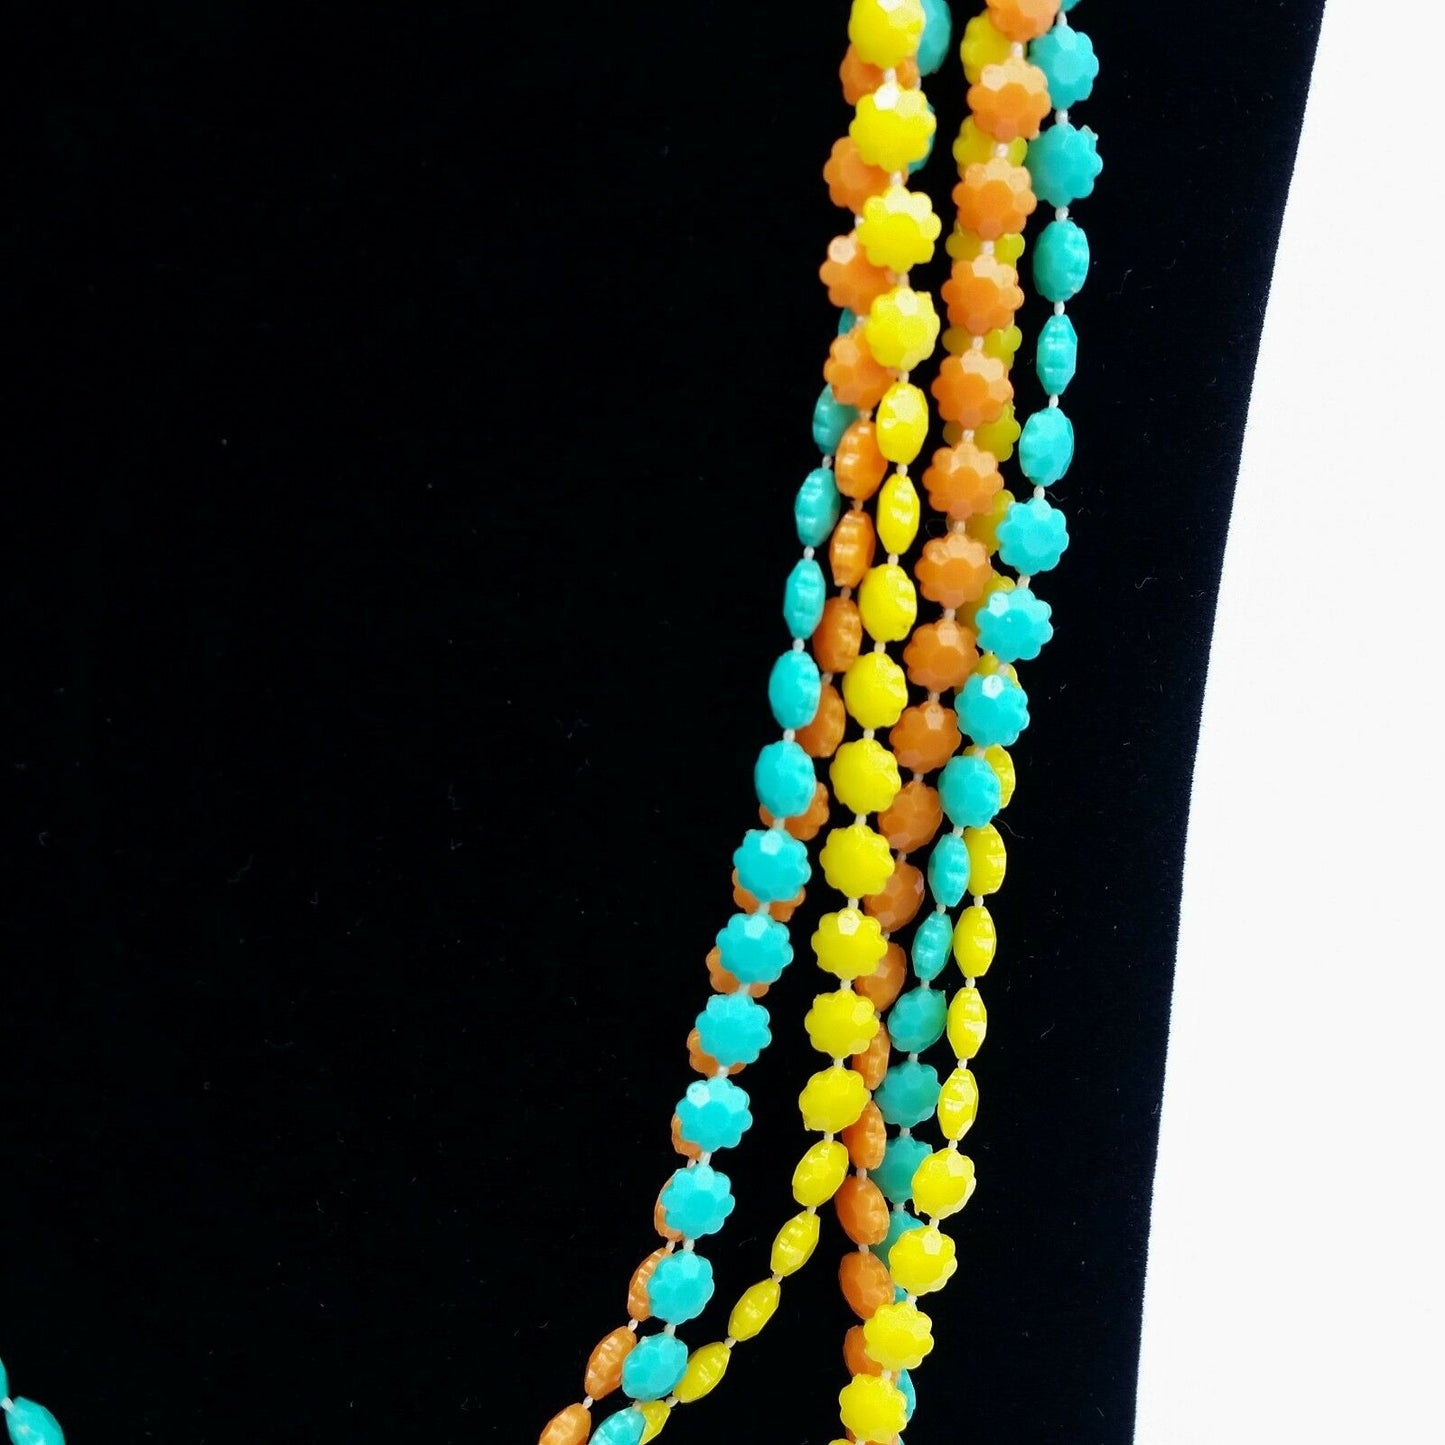 Vintage Flower Bead Necklace Multi Strand Extra Long Plastic Teal Yellow Orange Jewelry - At Grandma's Table